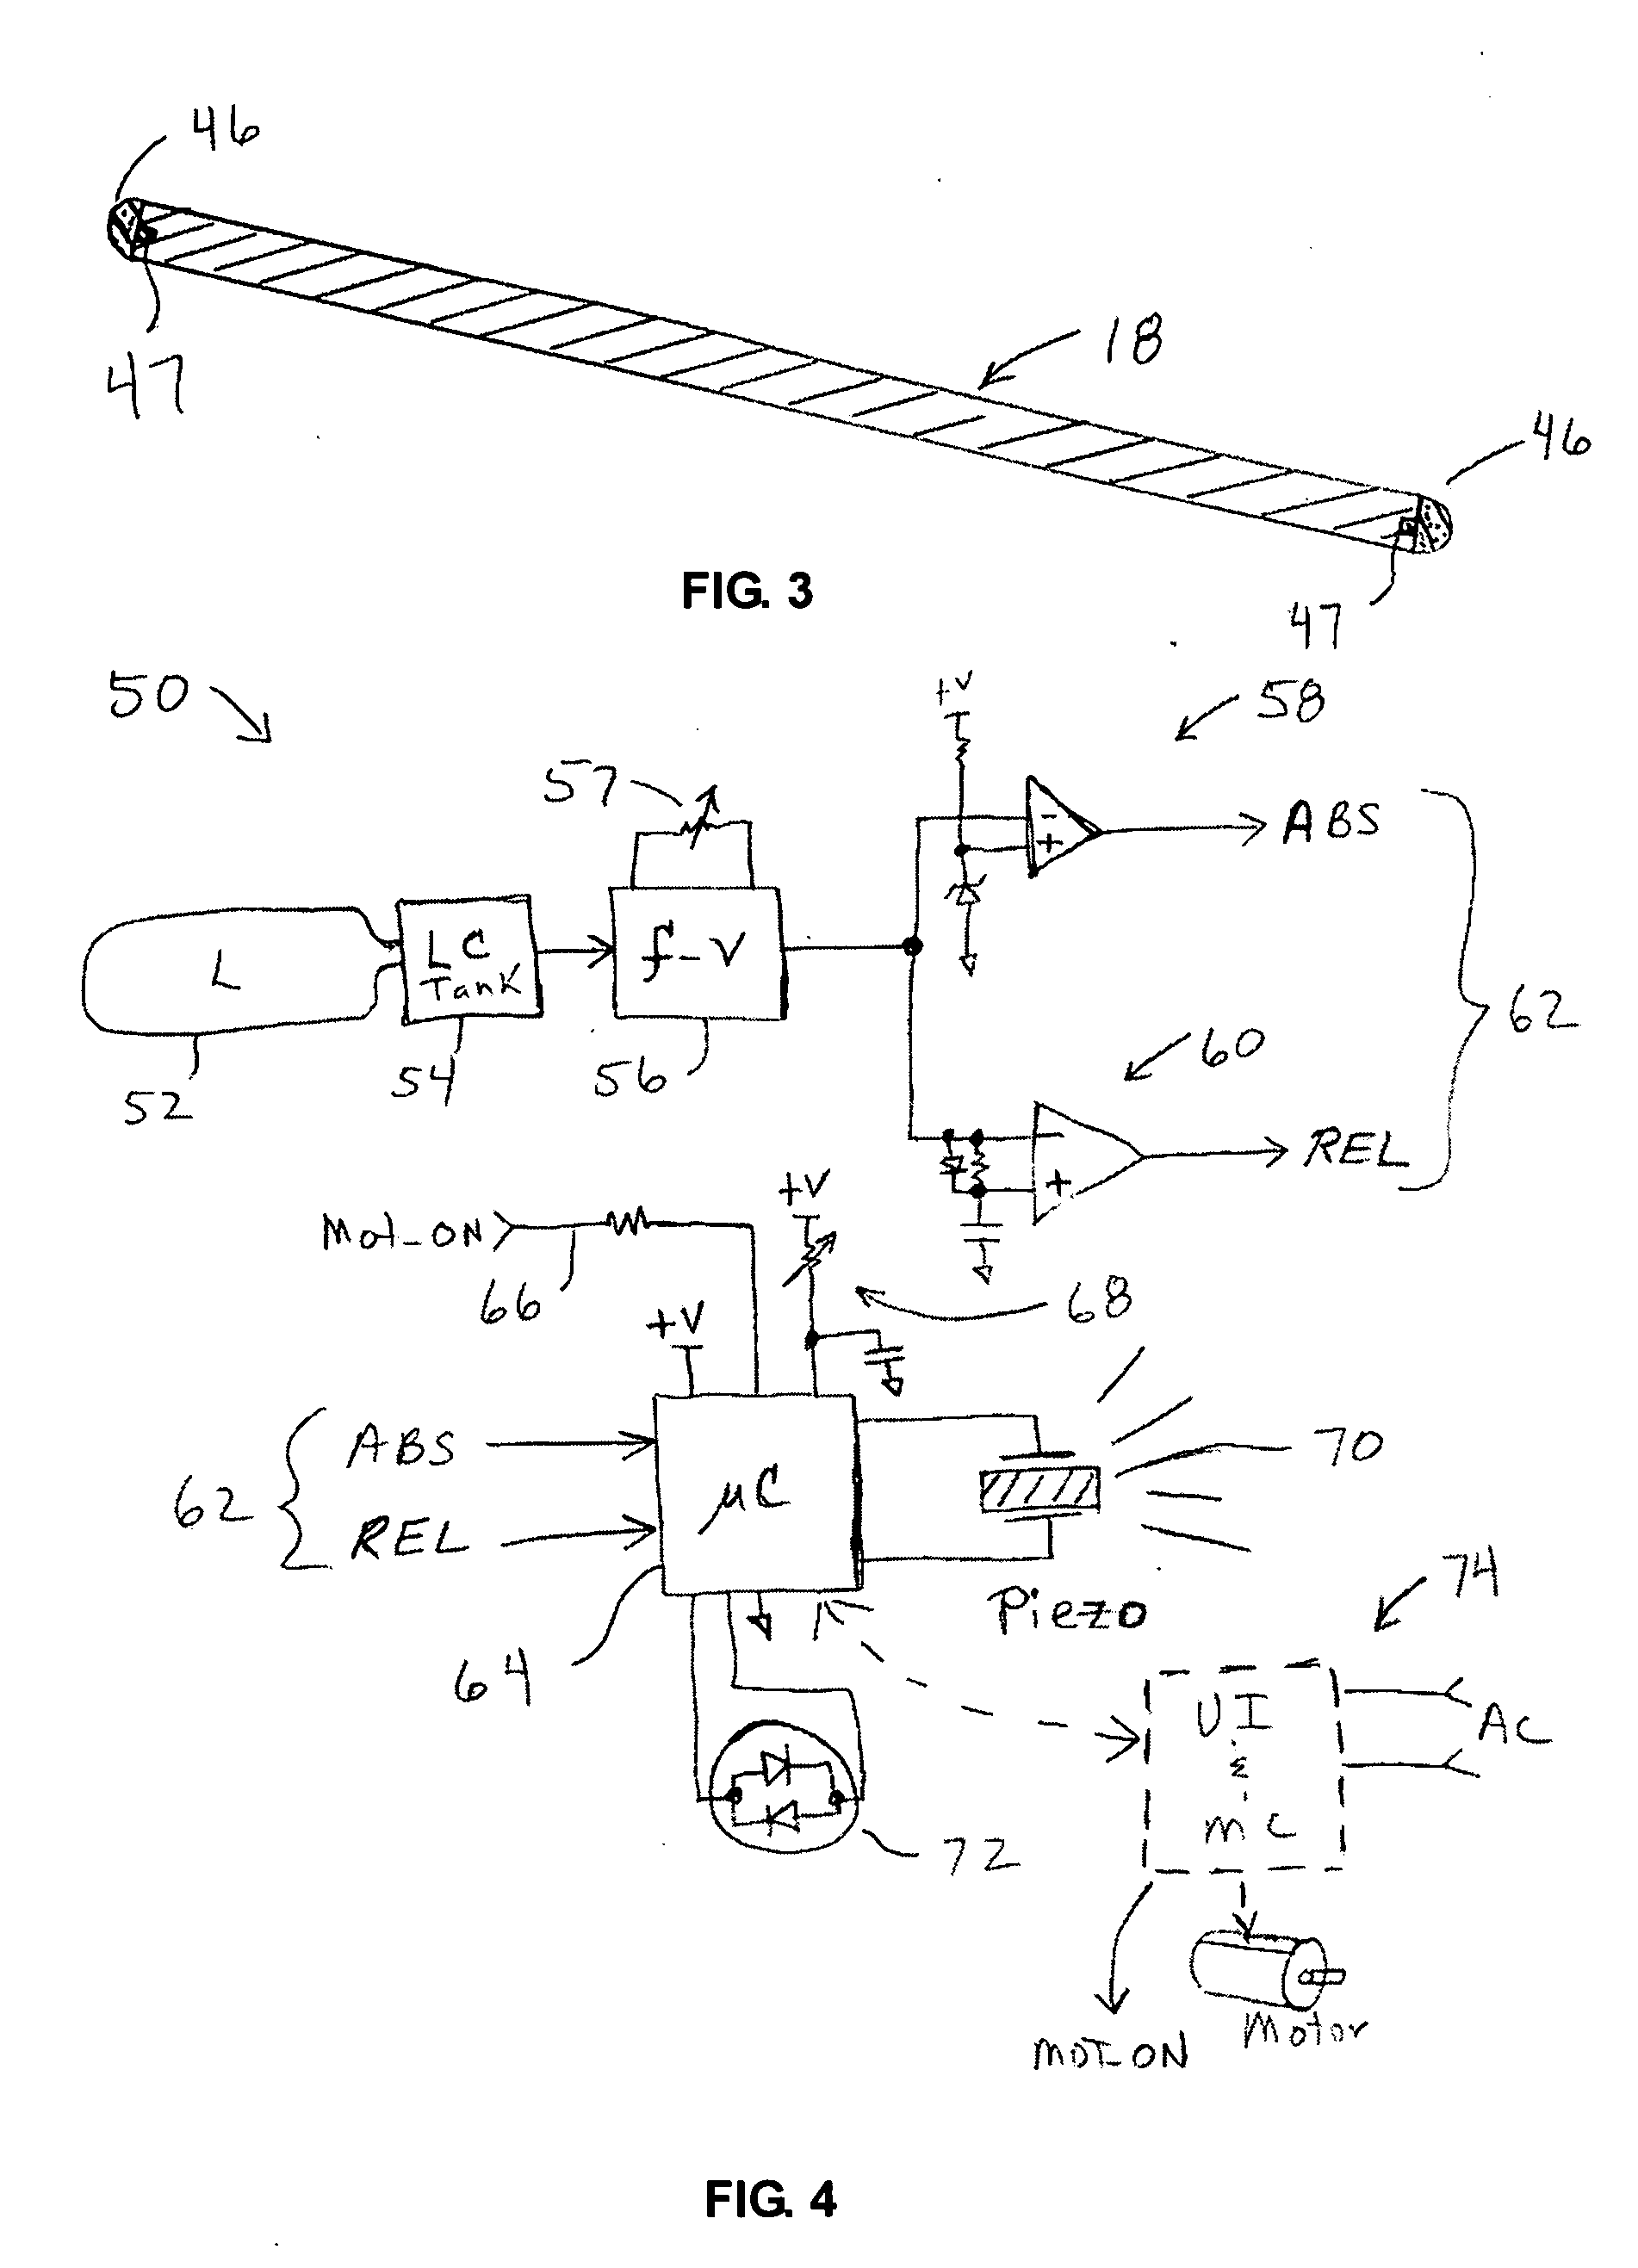 Ceiling fan proximity safety apparatus